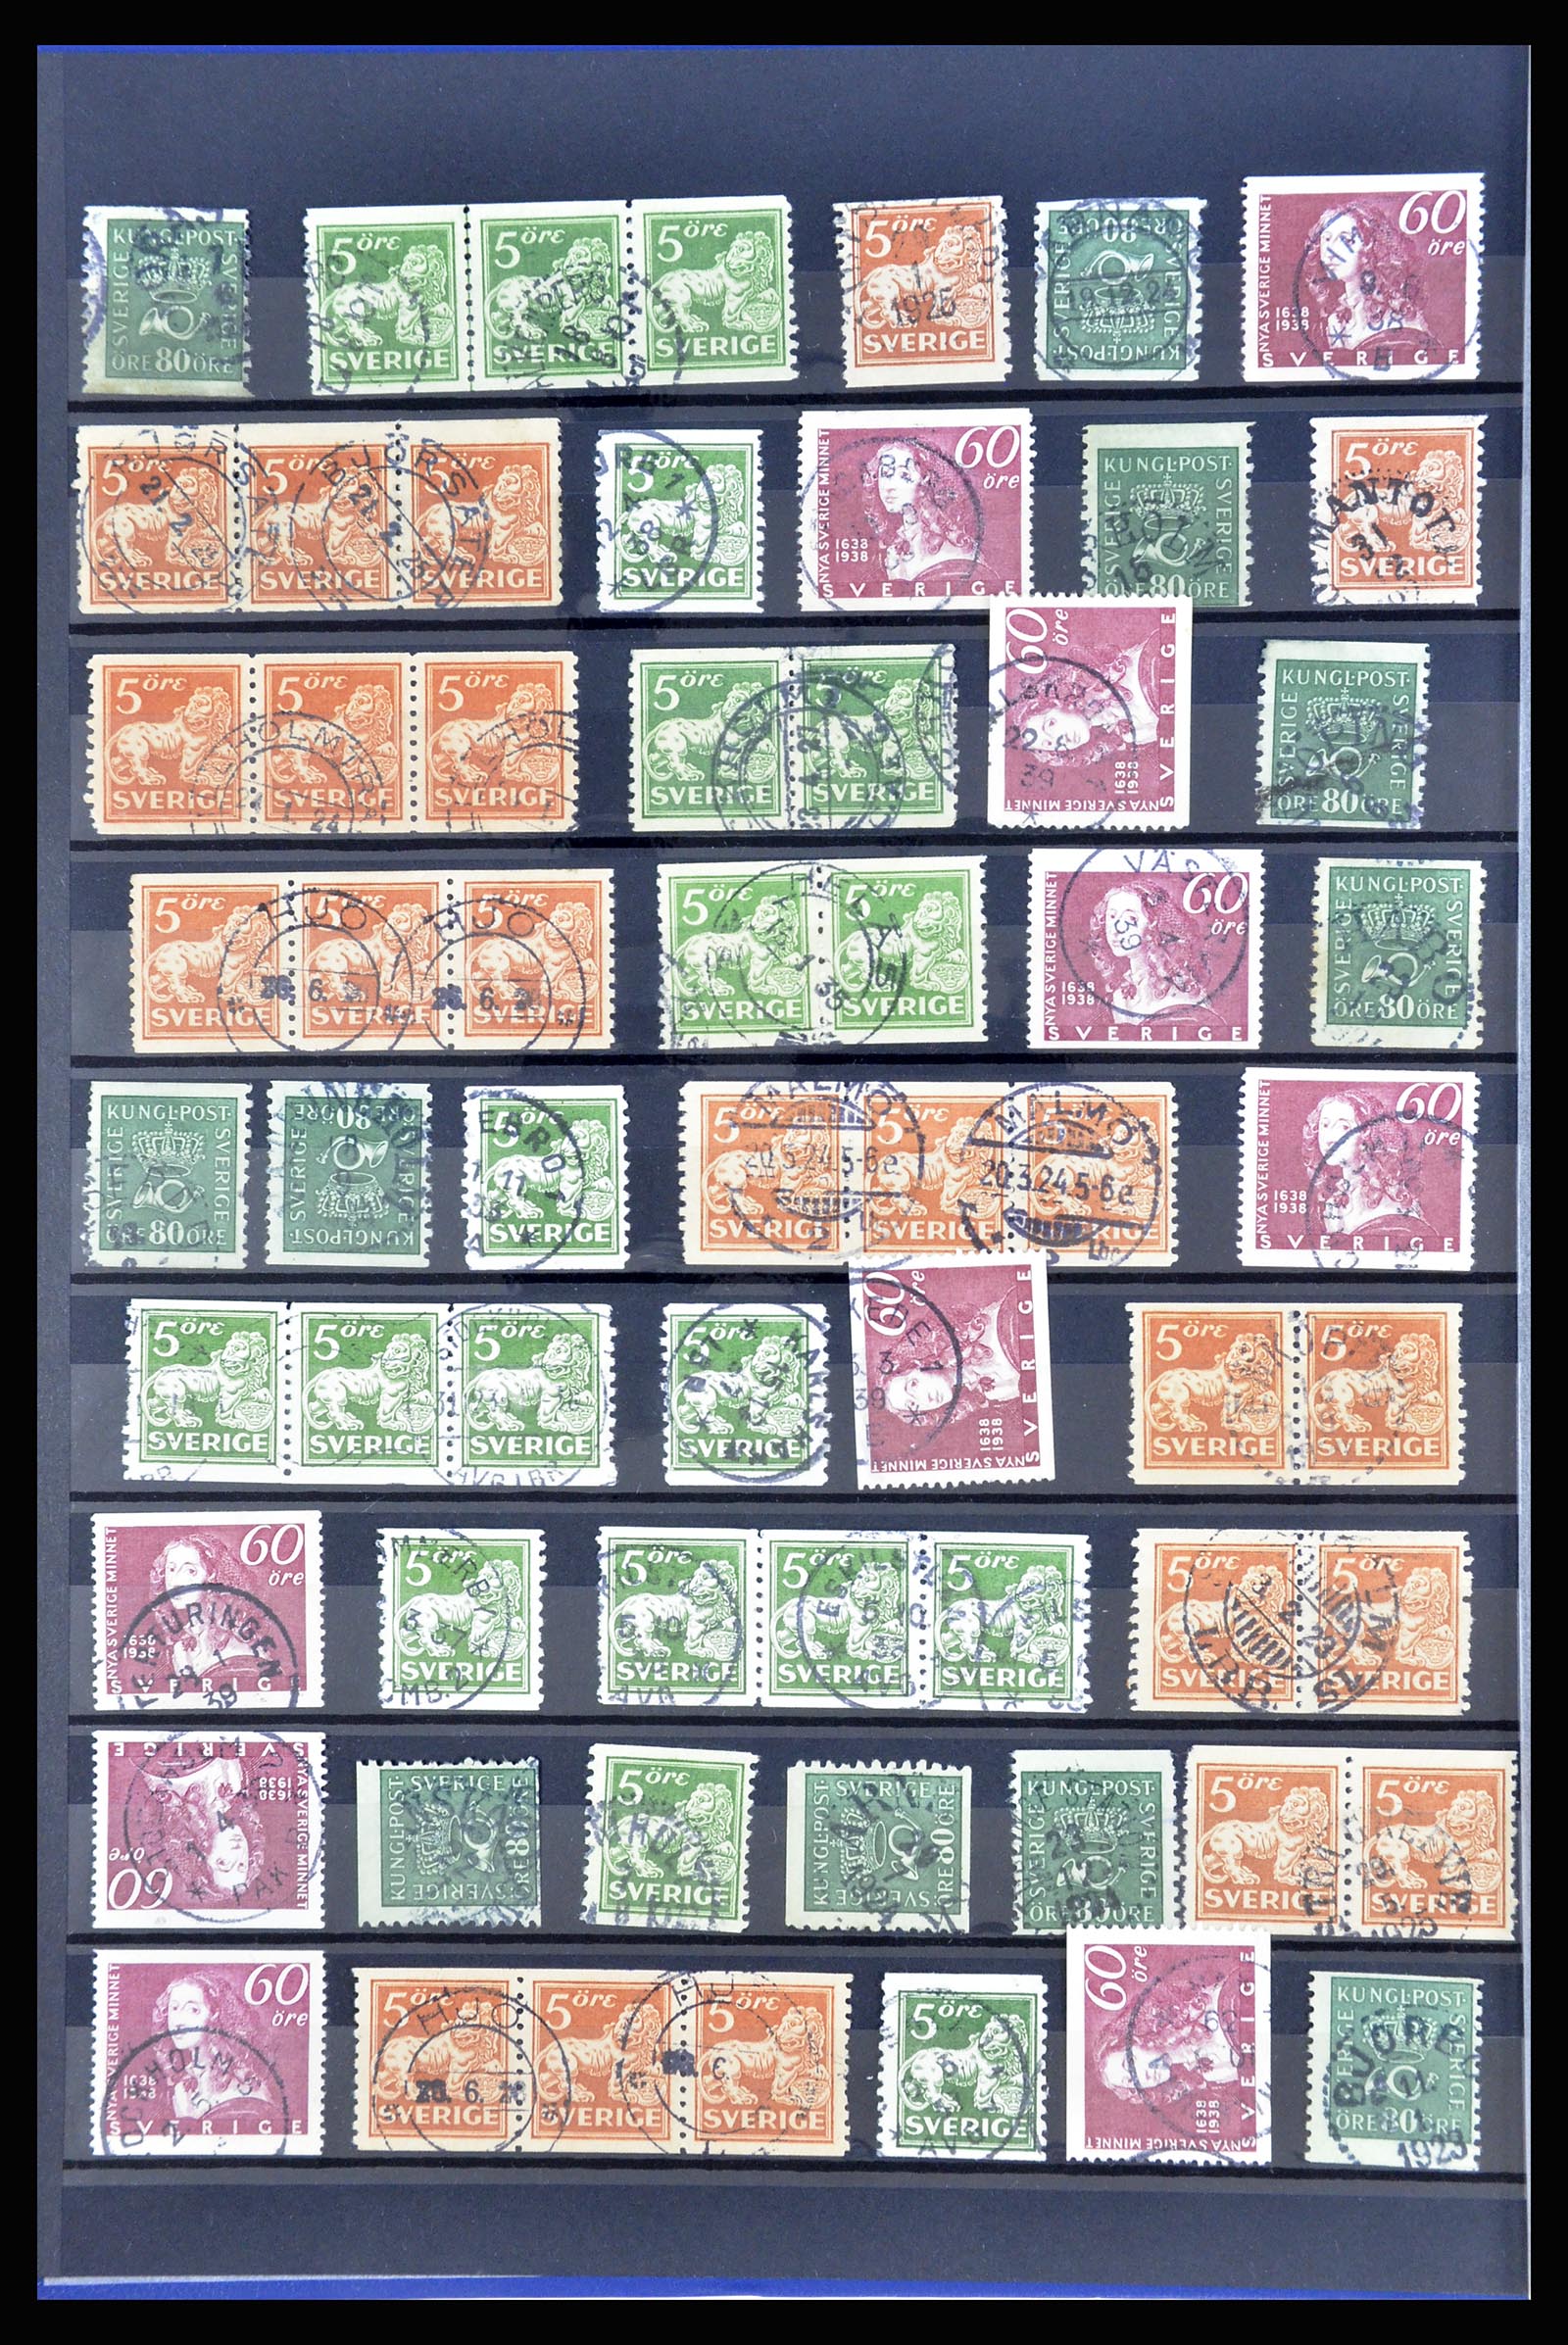 36316 004 - Stamp collection 36316 Sweden cancellations 1920-1938.